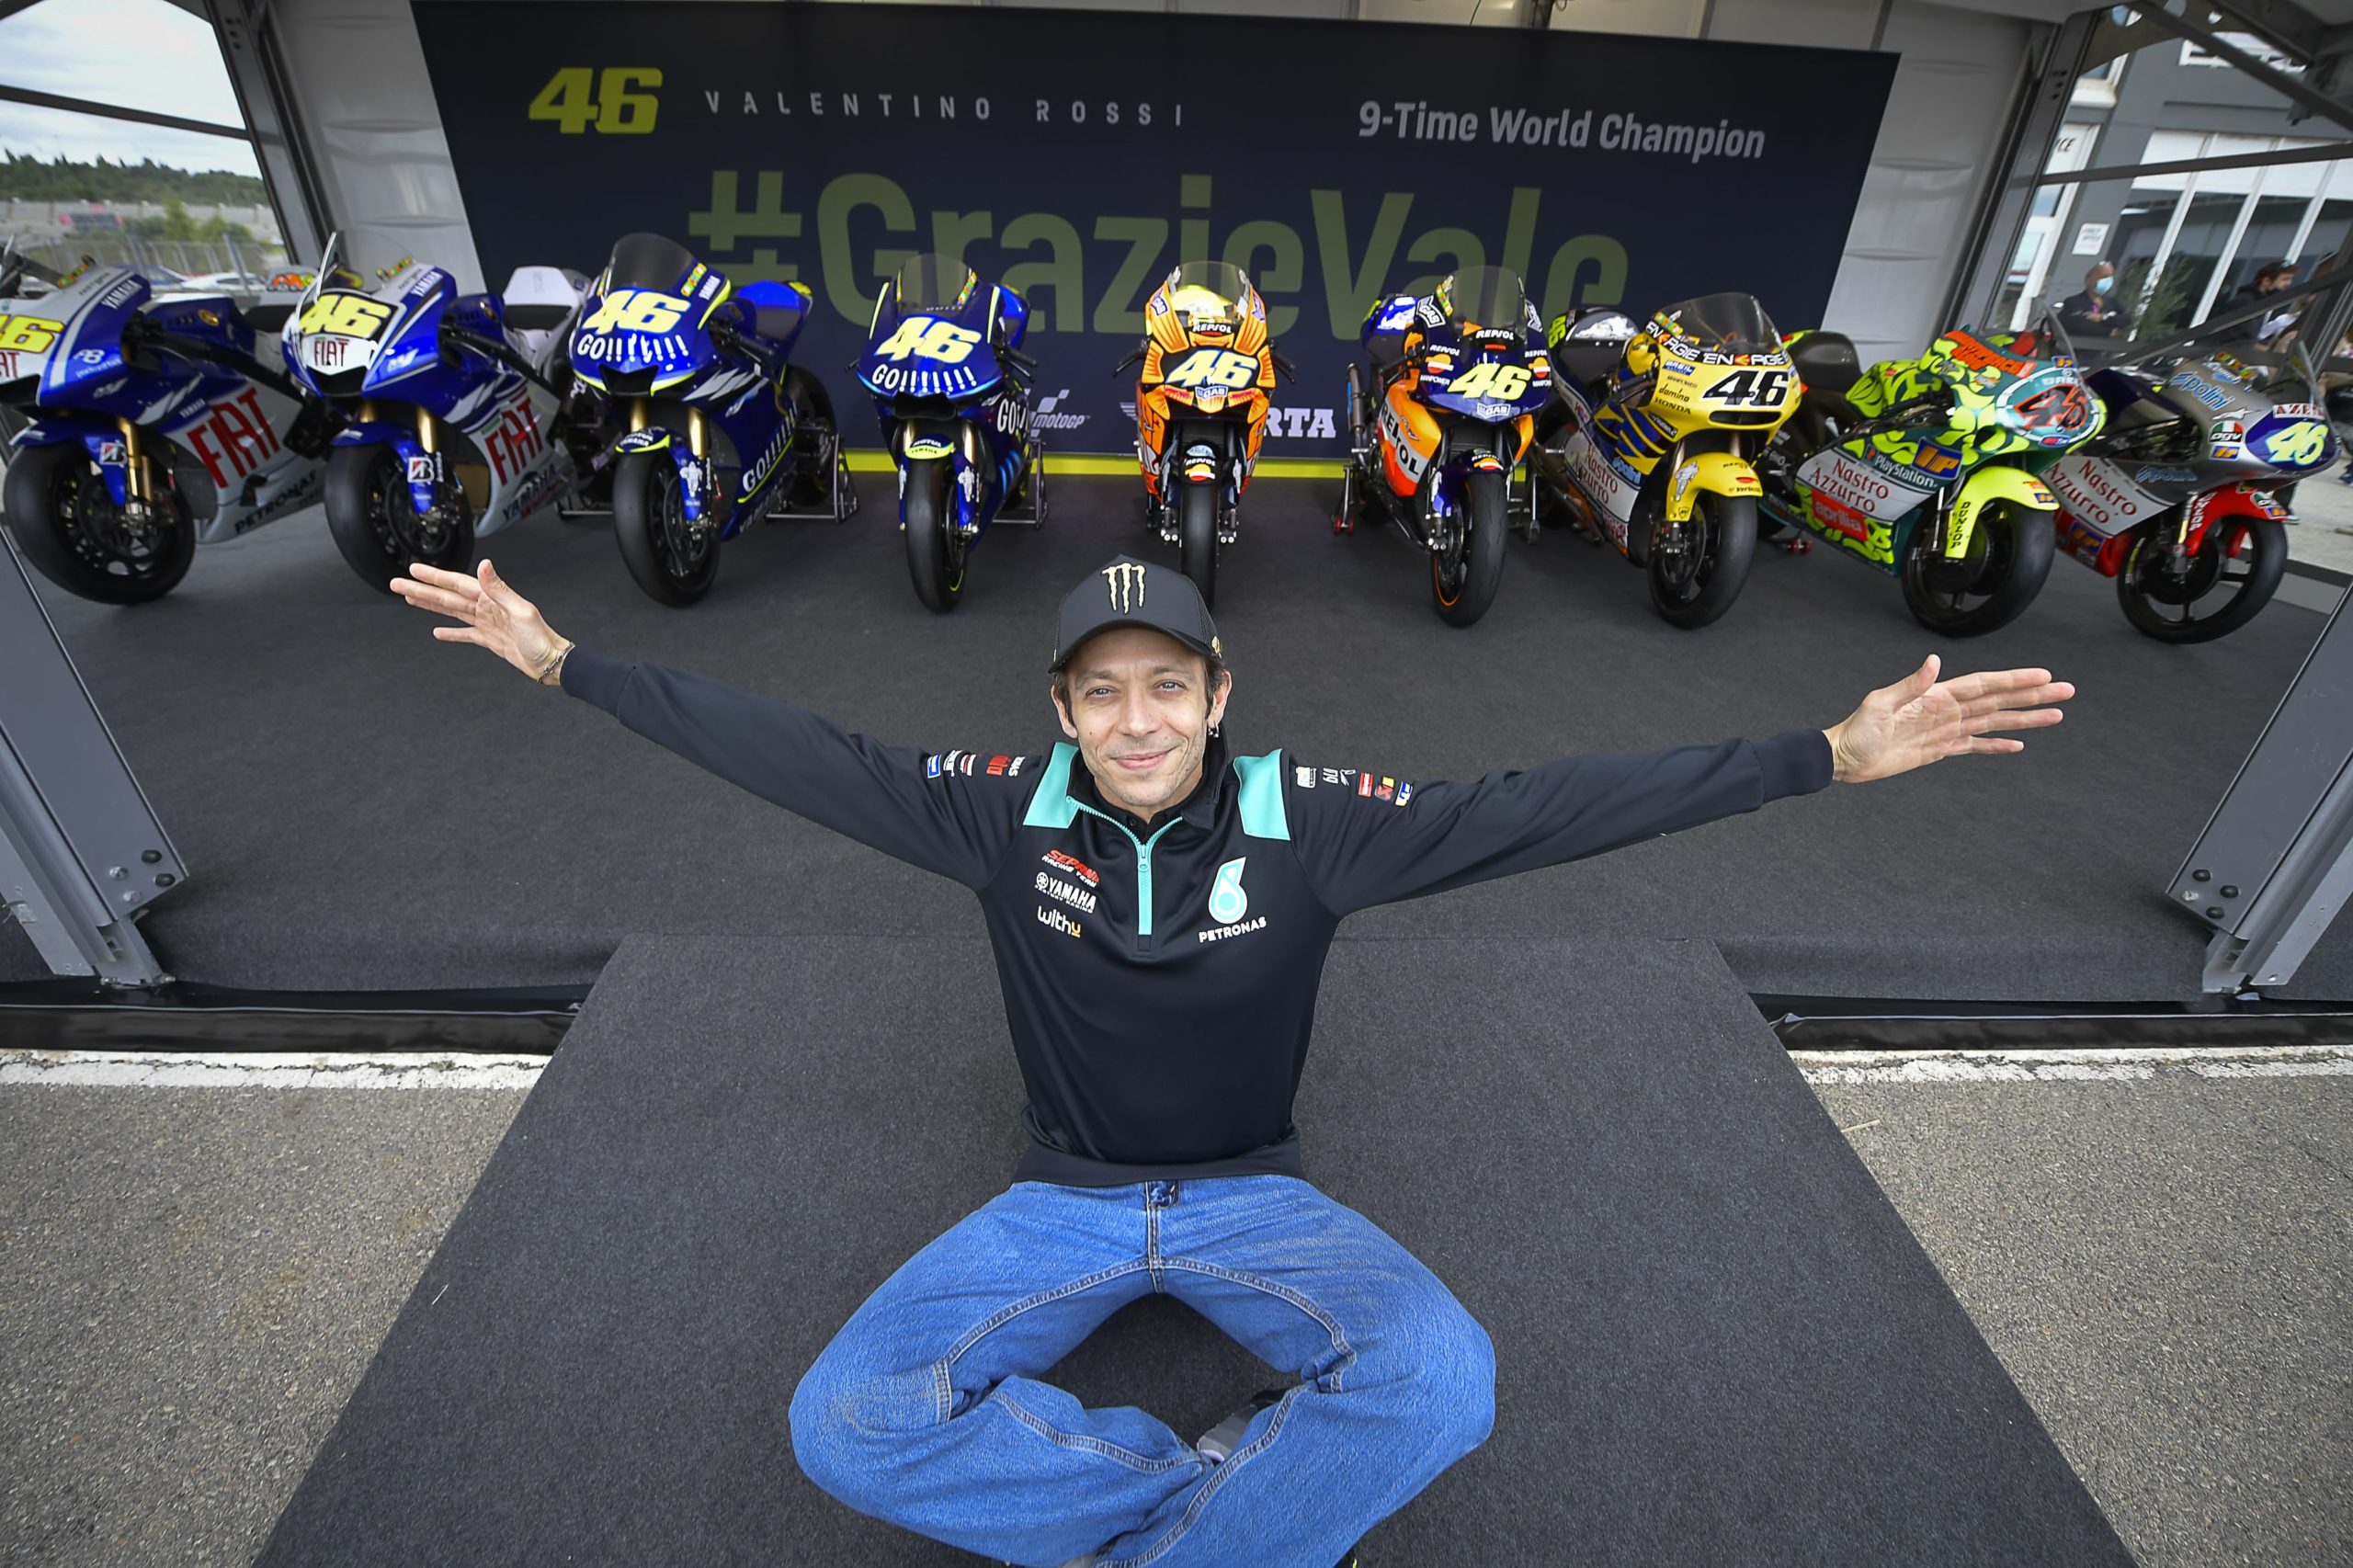 Rossi reunites with his championship winning bikes ahead of his last MotoGP race in Valencia